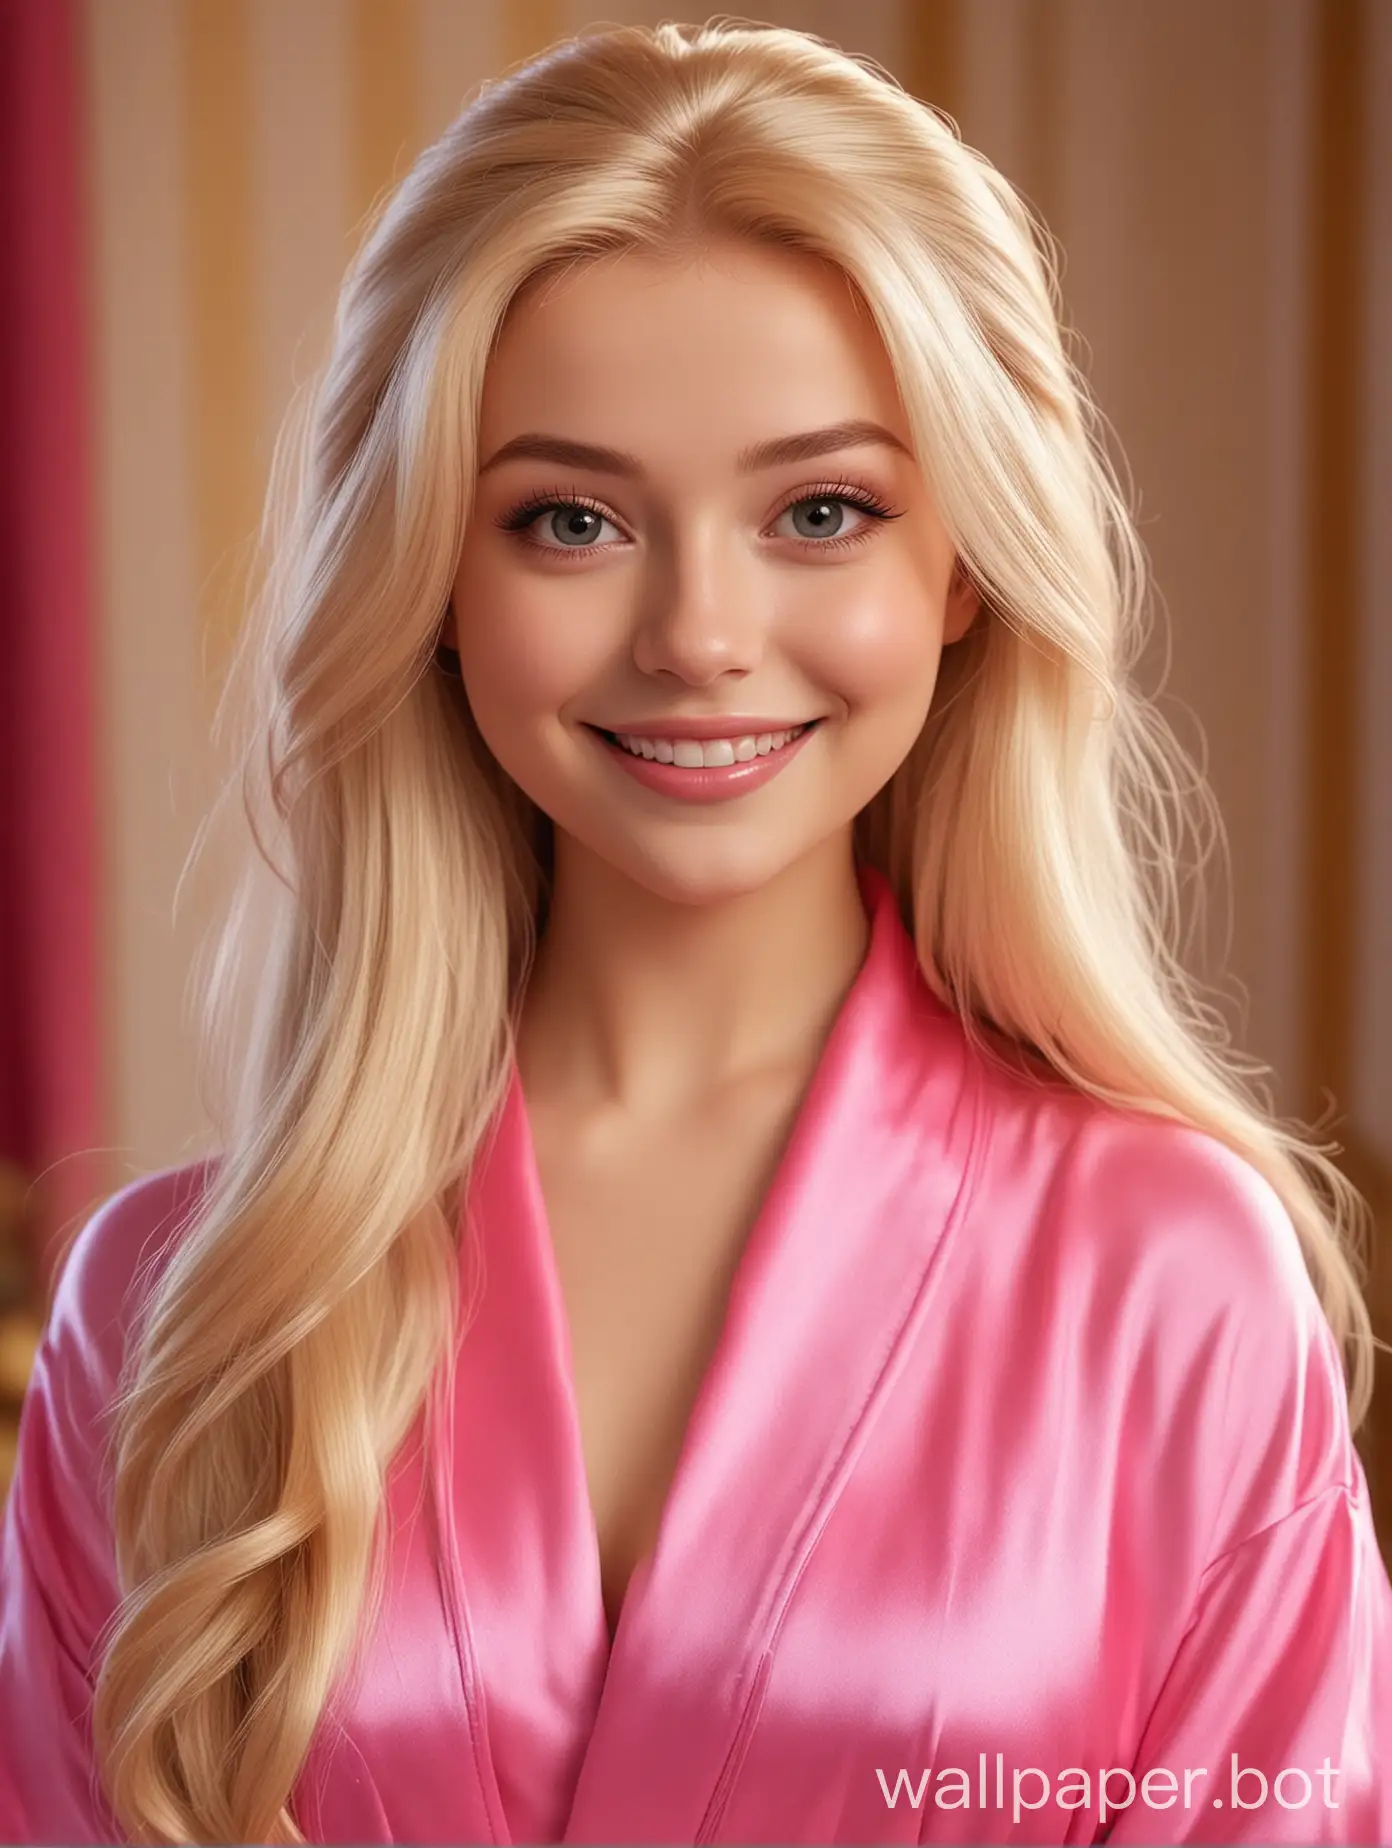 The realistic Disney cutie Alyonushka with loose long straight hair in a bright pink silk robe is smiling